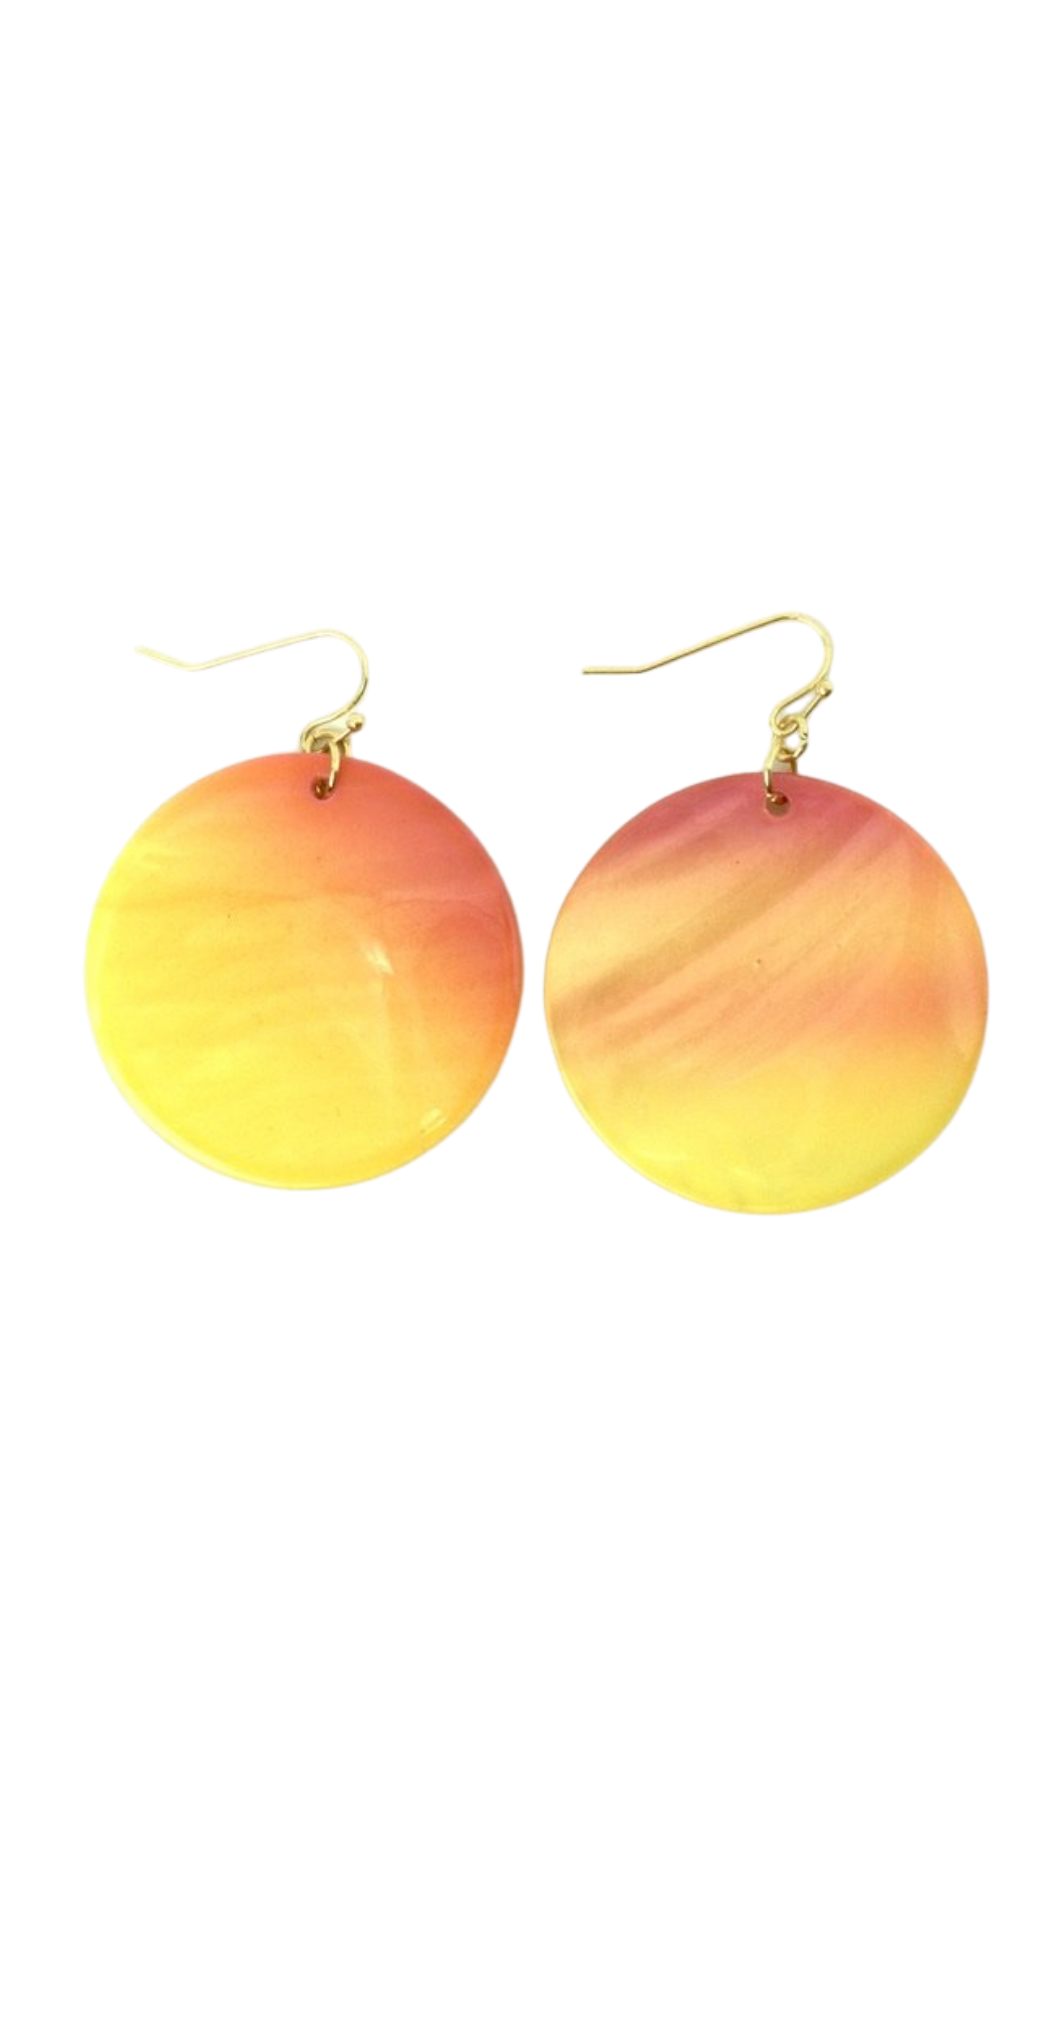 Gold Dangle Earrings with Ombre Circles - The Fashion Foundation - {{ discount designer}}